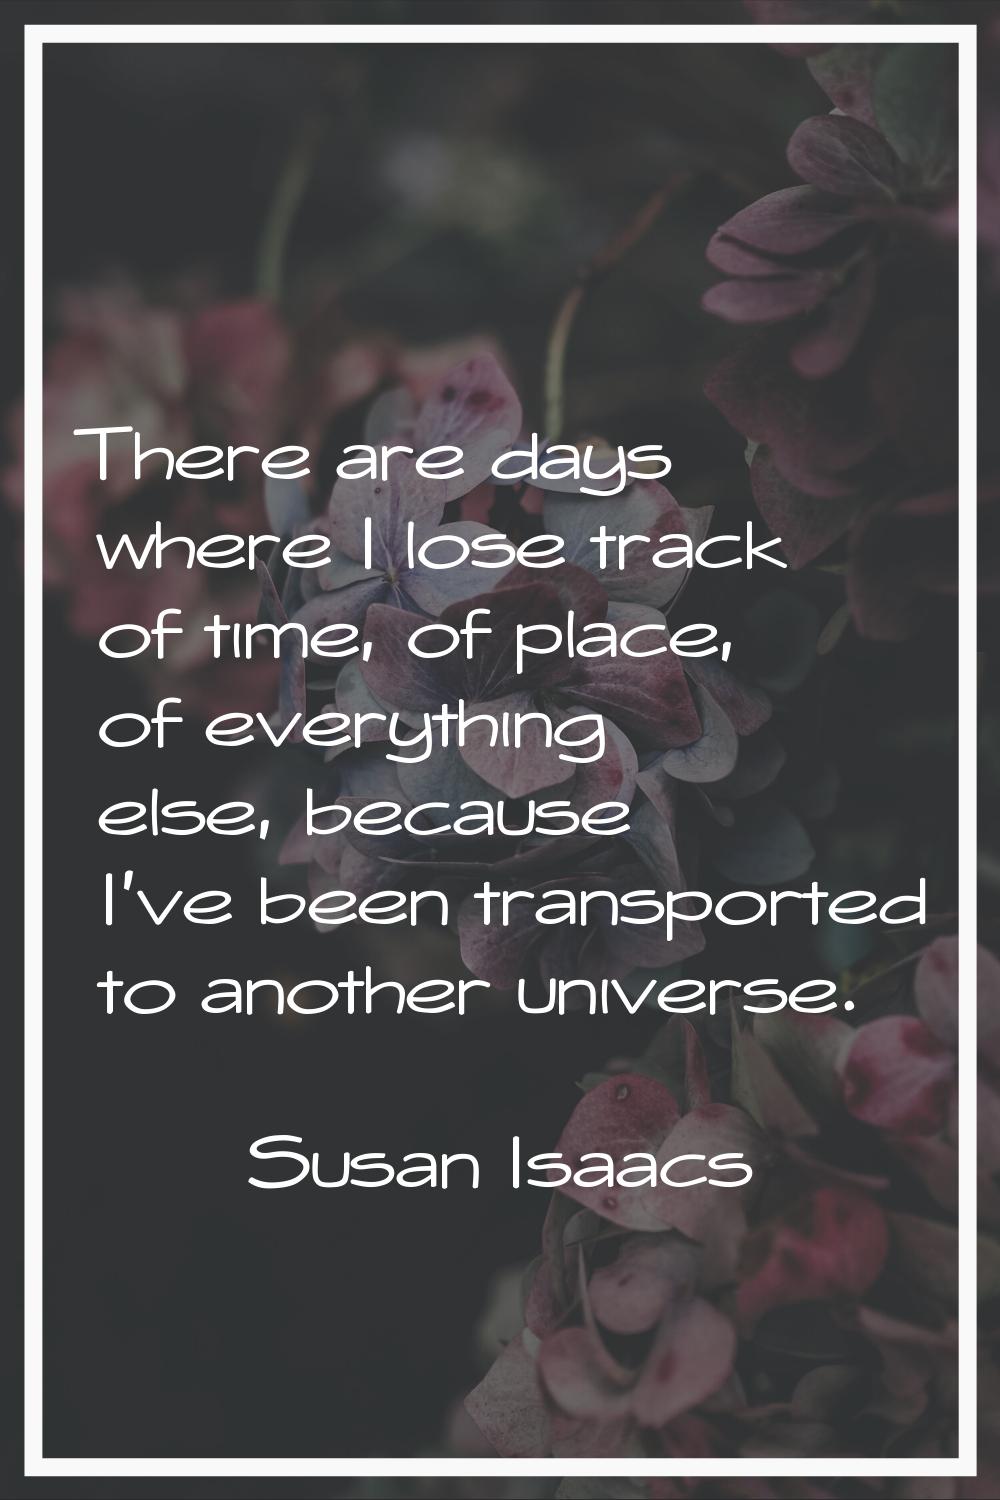 There are days where I lose track of time, of place, of everything else, because I've been transpor